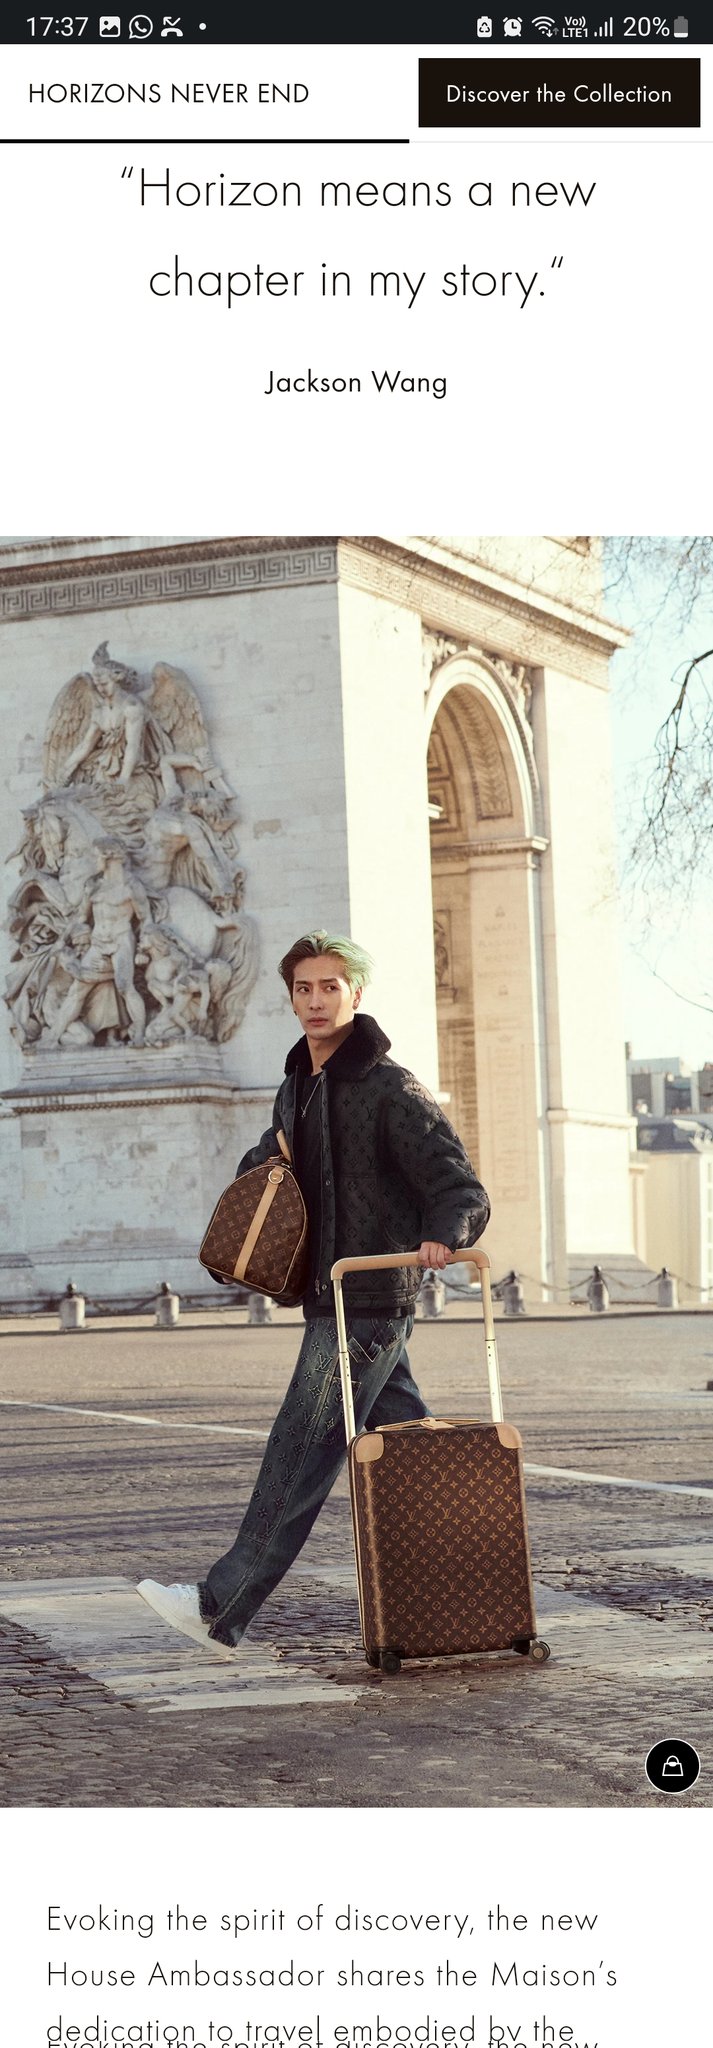 Jackson Wang for Louis Vuitton: Travel with the House Ambassador